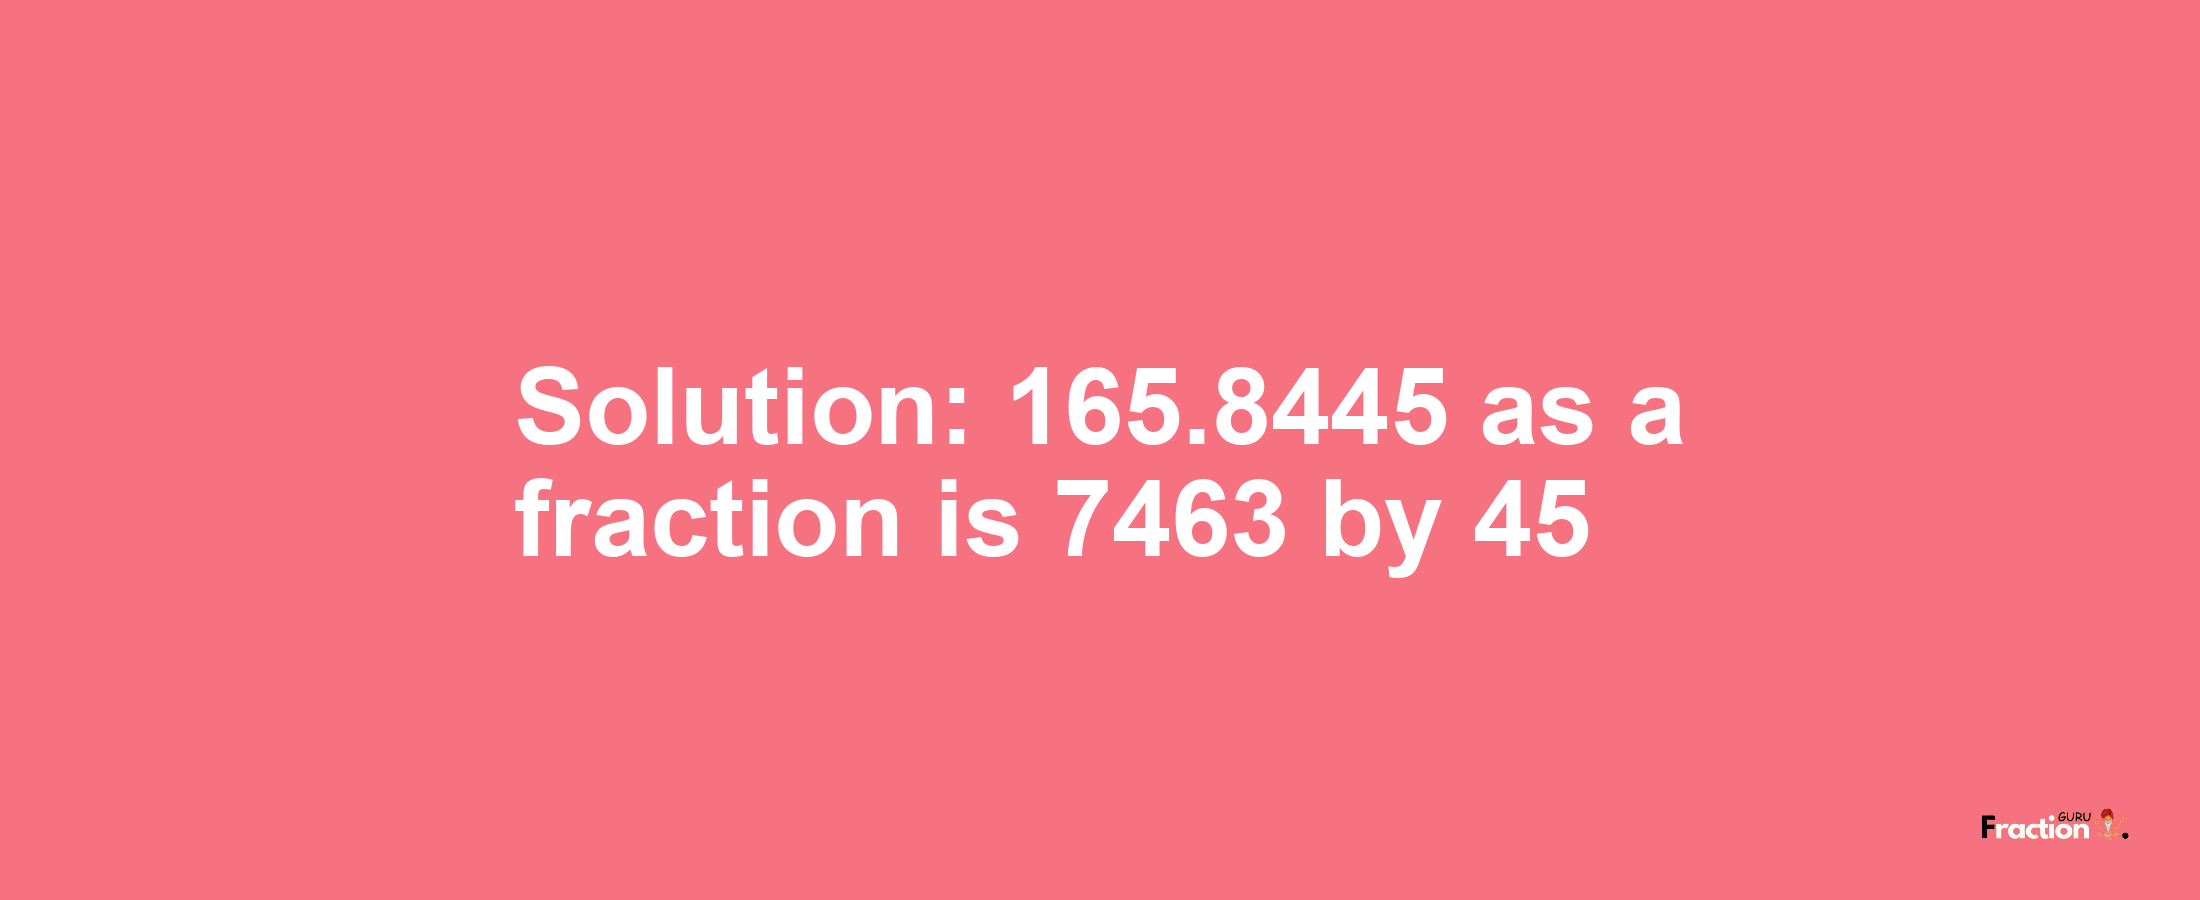 Solution:165.8445 as a fraction is 7463/45